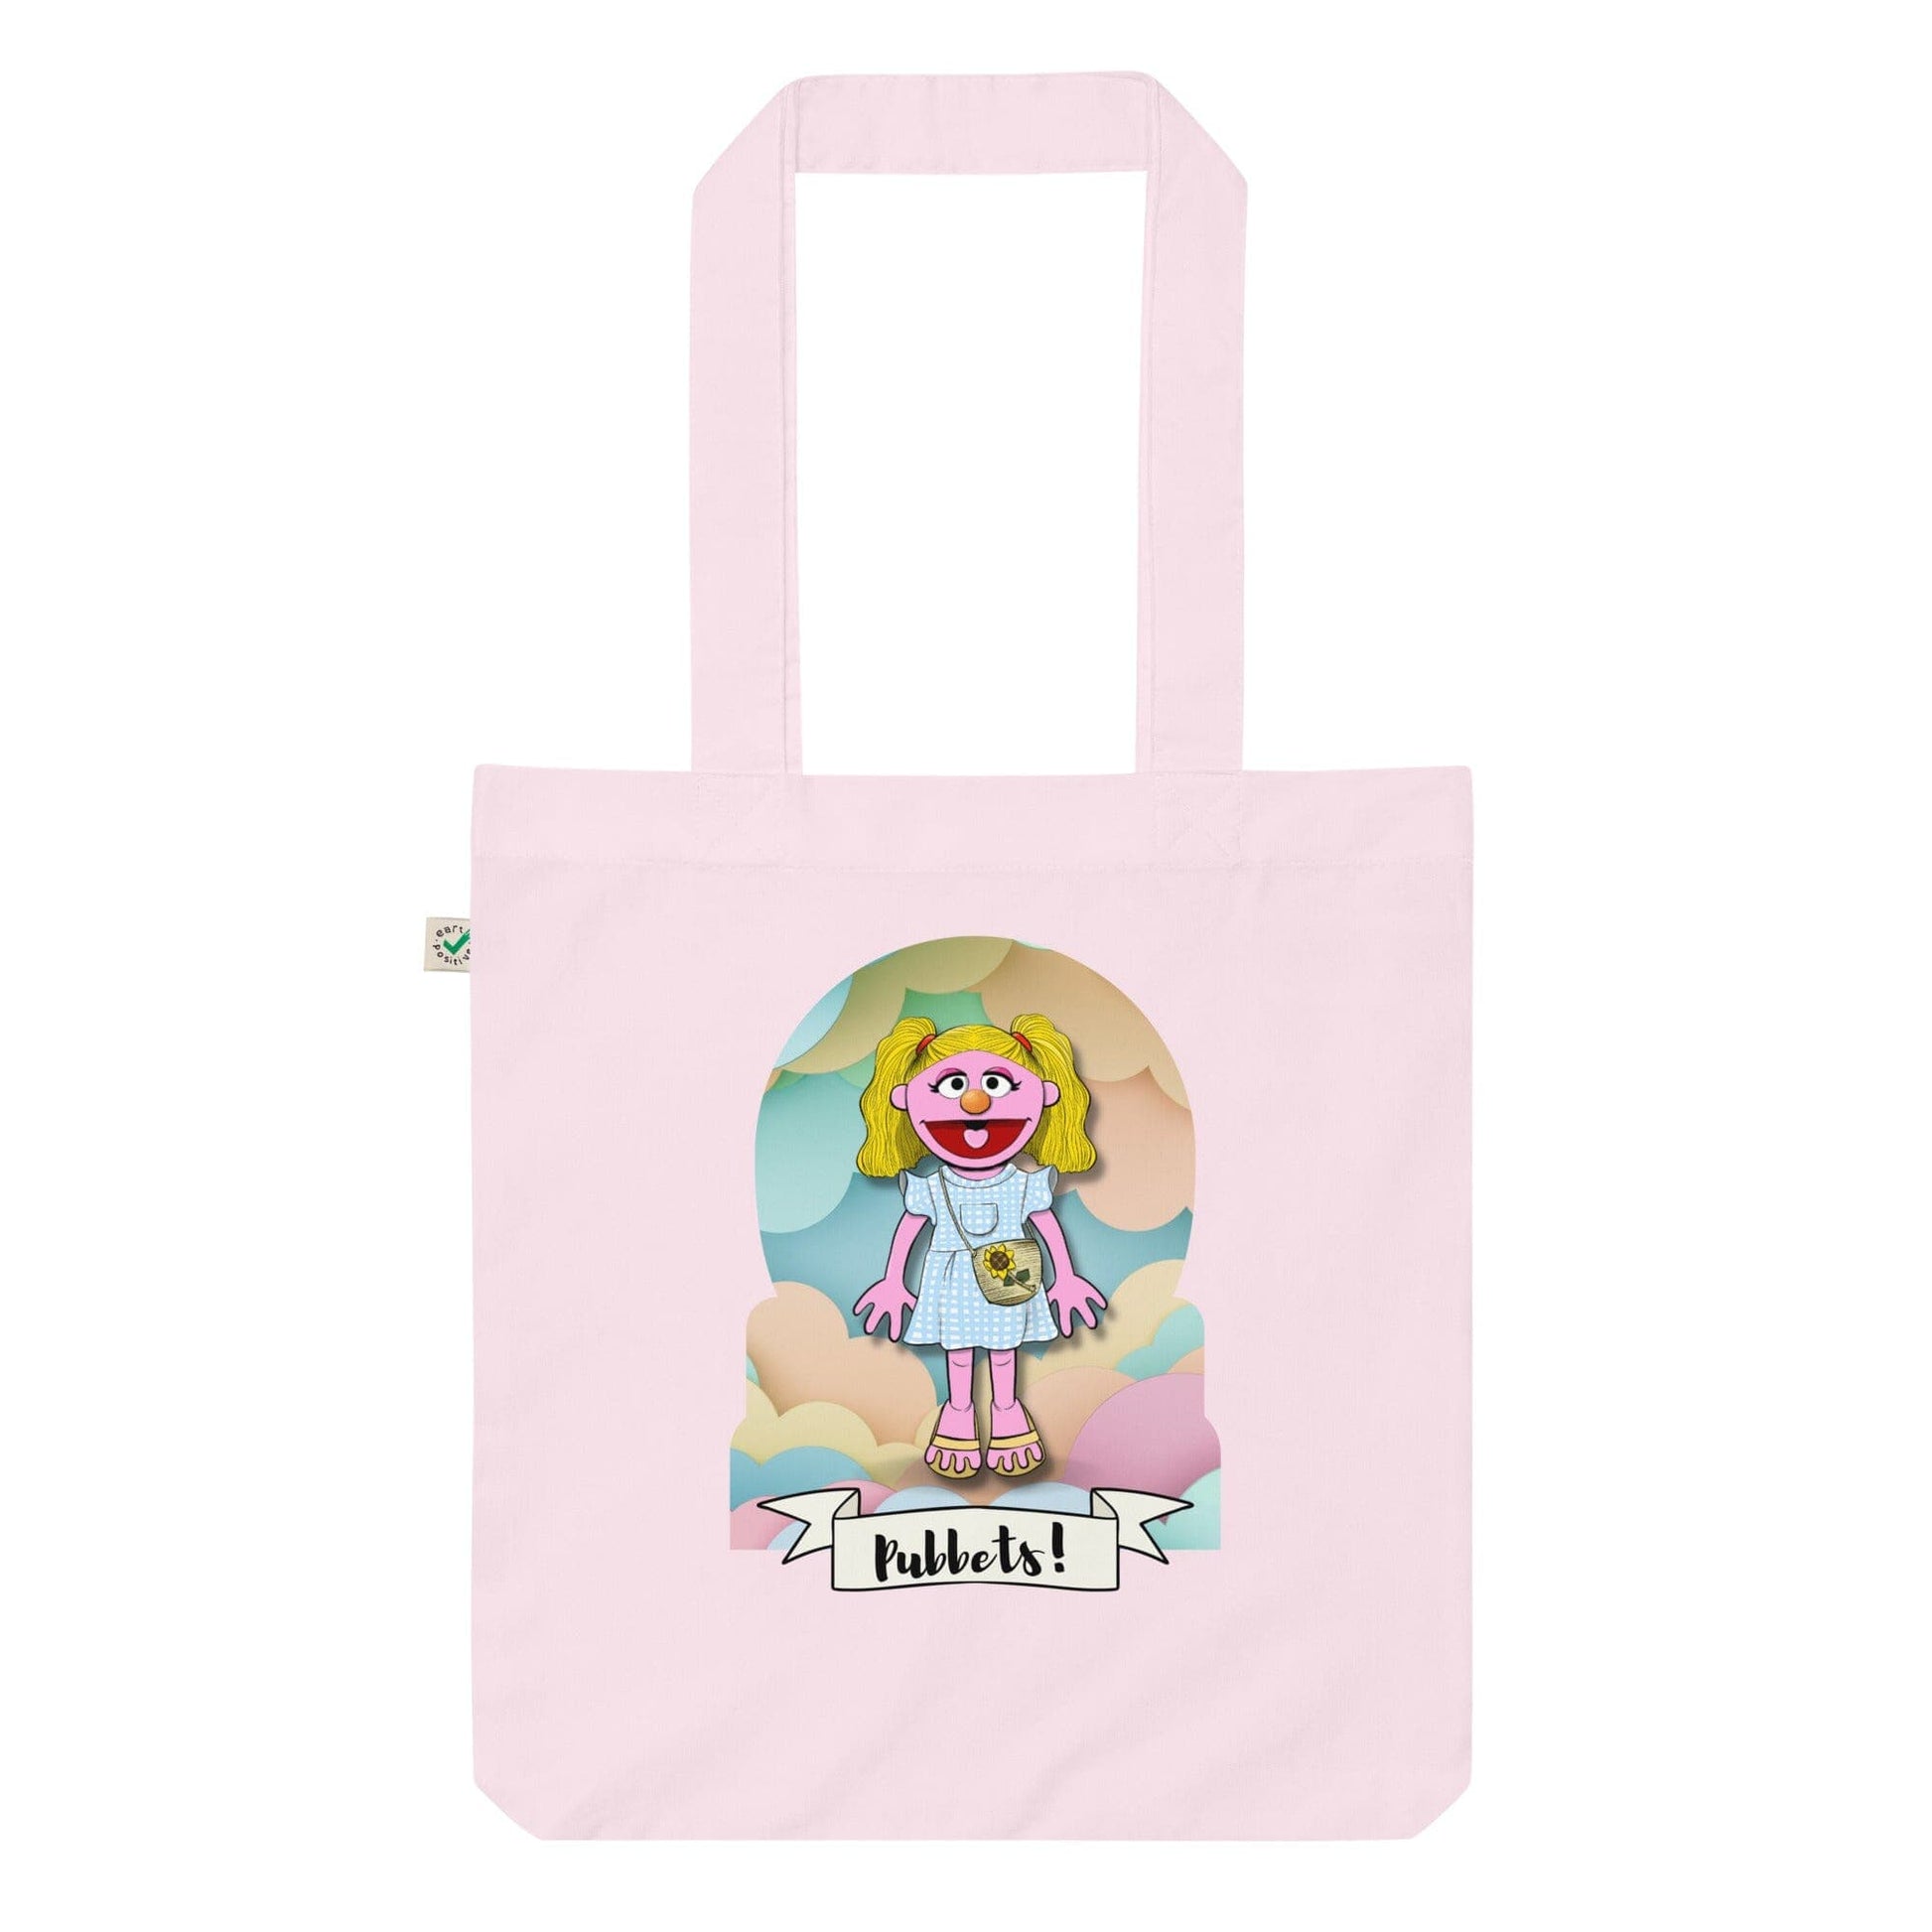 Pubbets Merch Candy Pink Rosey Organic Fashion Tote Bag